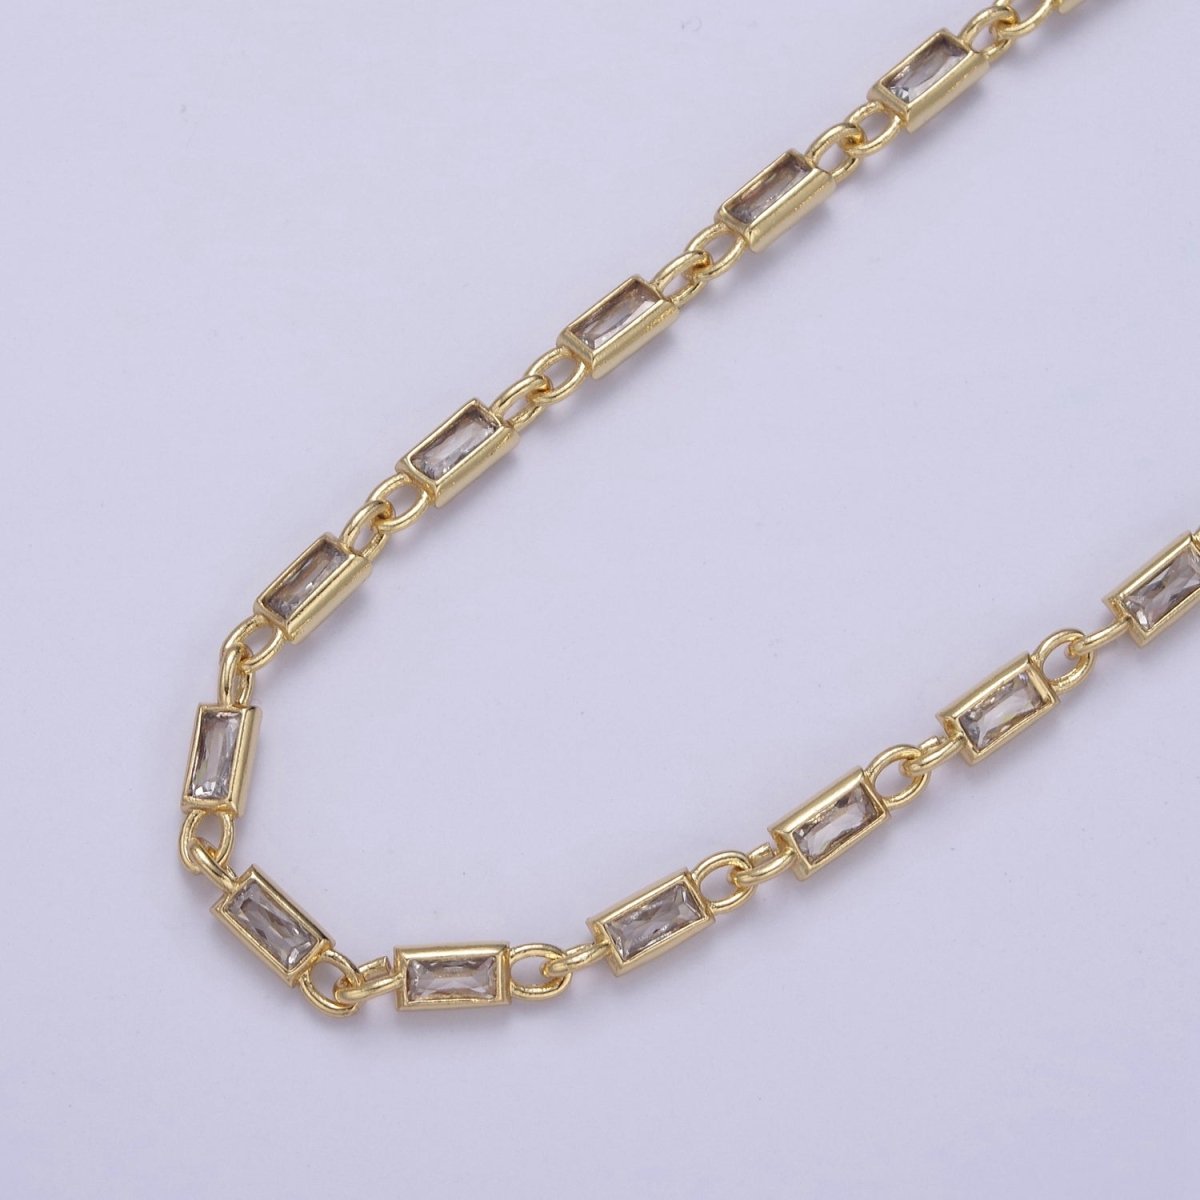 24K Gold Filled 3.6mm Baguette Cubic Zirconia Station Necklace Bulk Unfinished Chain | ROLL-757, ROLL-778, ROLL-779, ROLL-860, ROLL-861 Clearance Pricing - DLUXCA